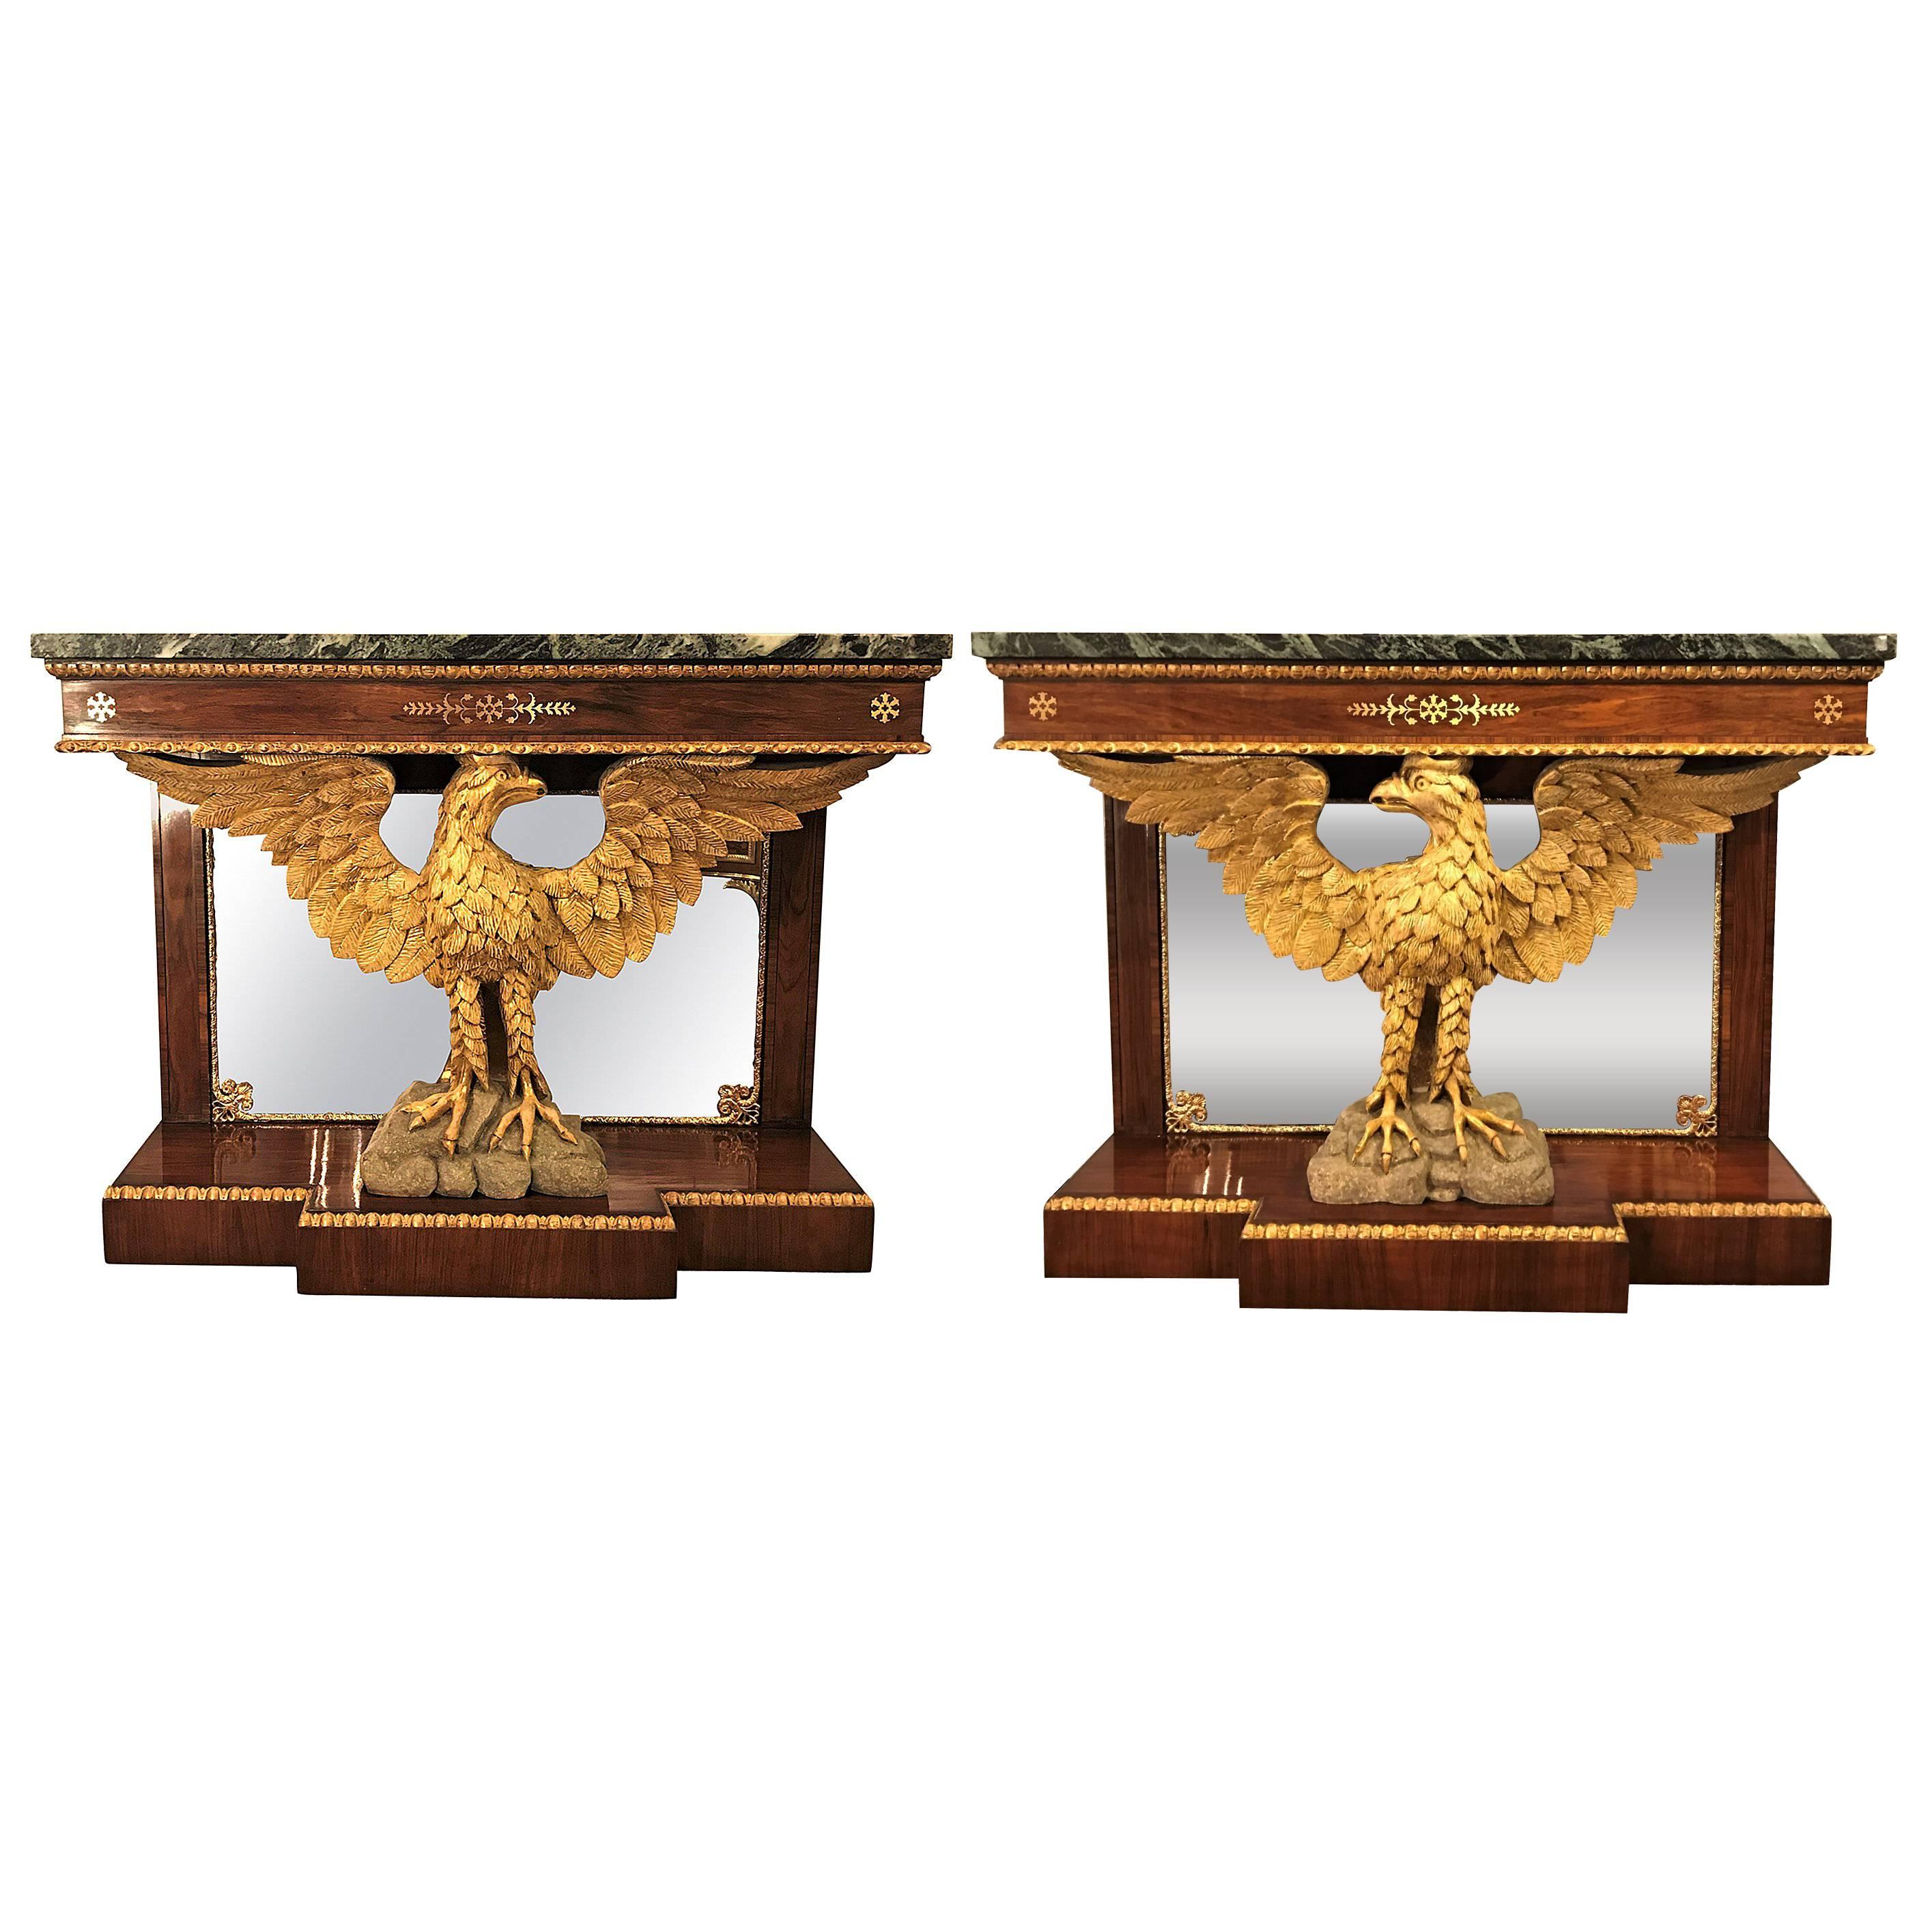 American Designer, Federal Consoles, Mahogany, Marble, Gold Gilt, Mirror, 1940s For Sale